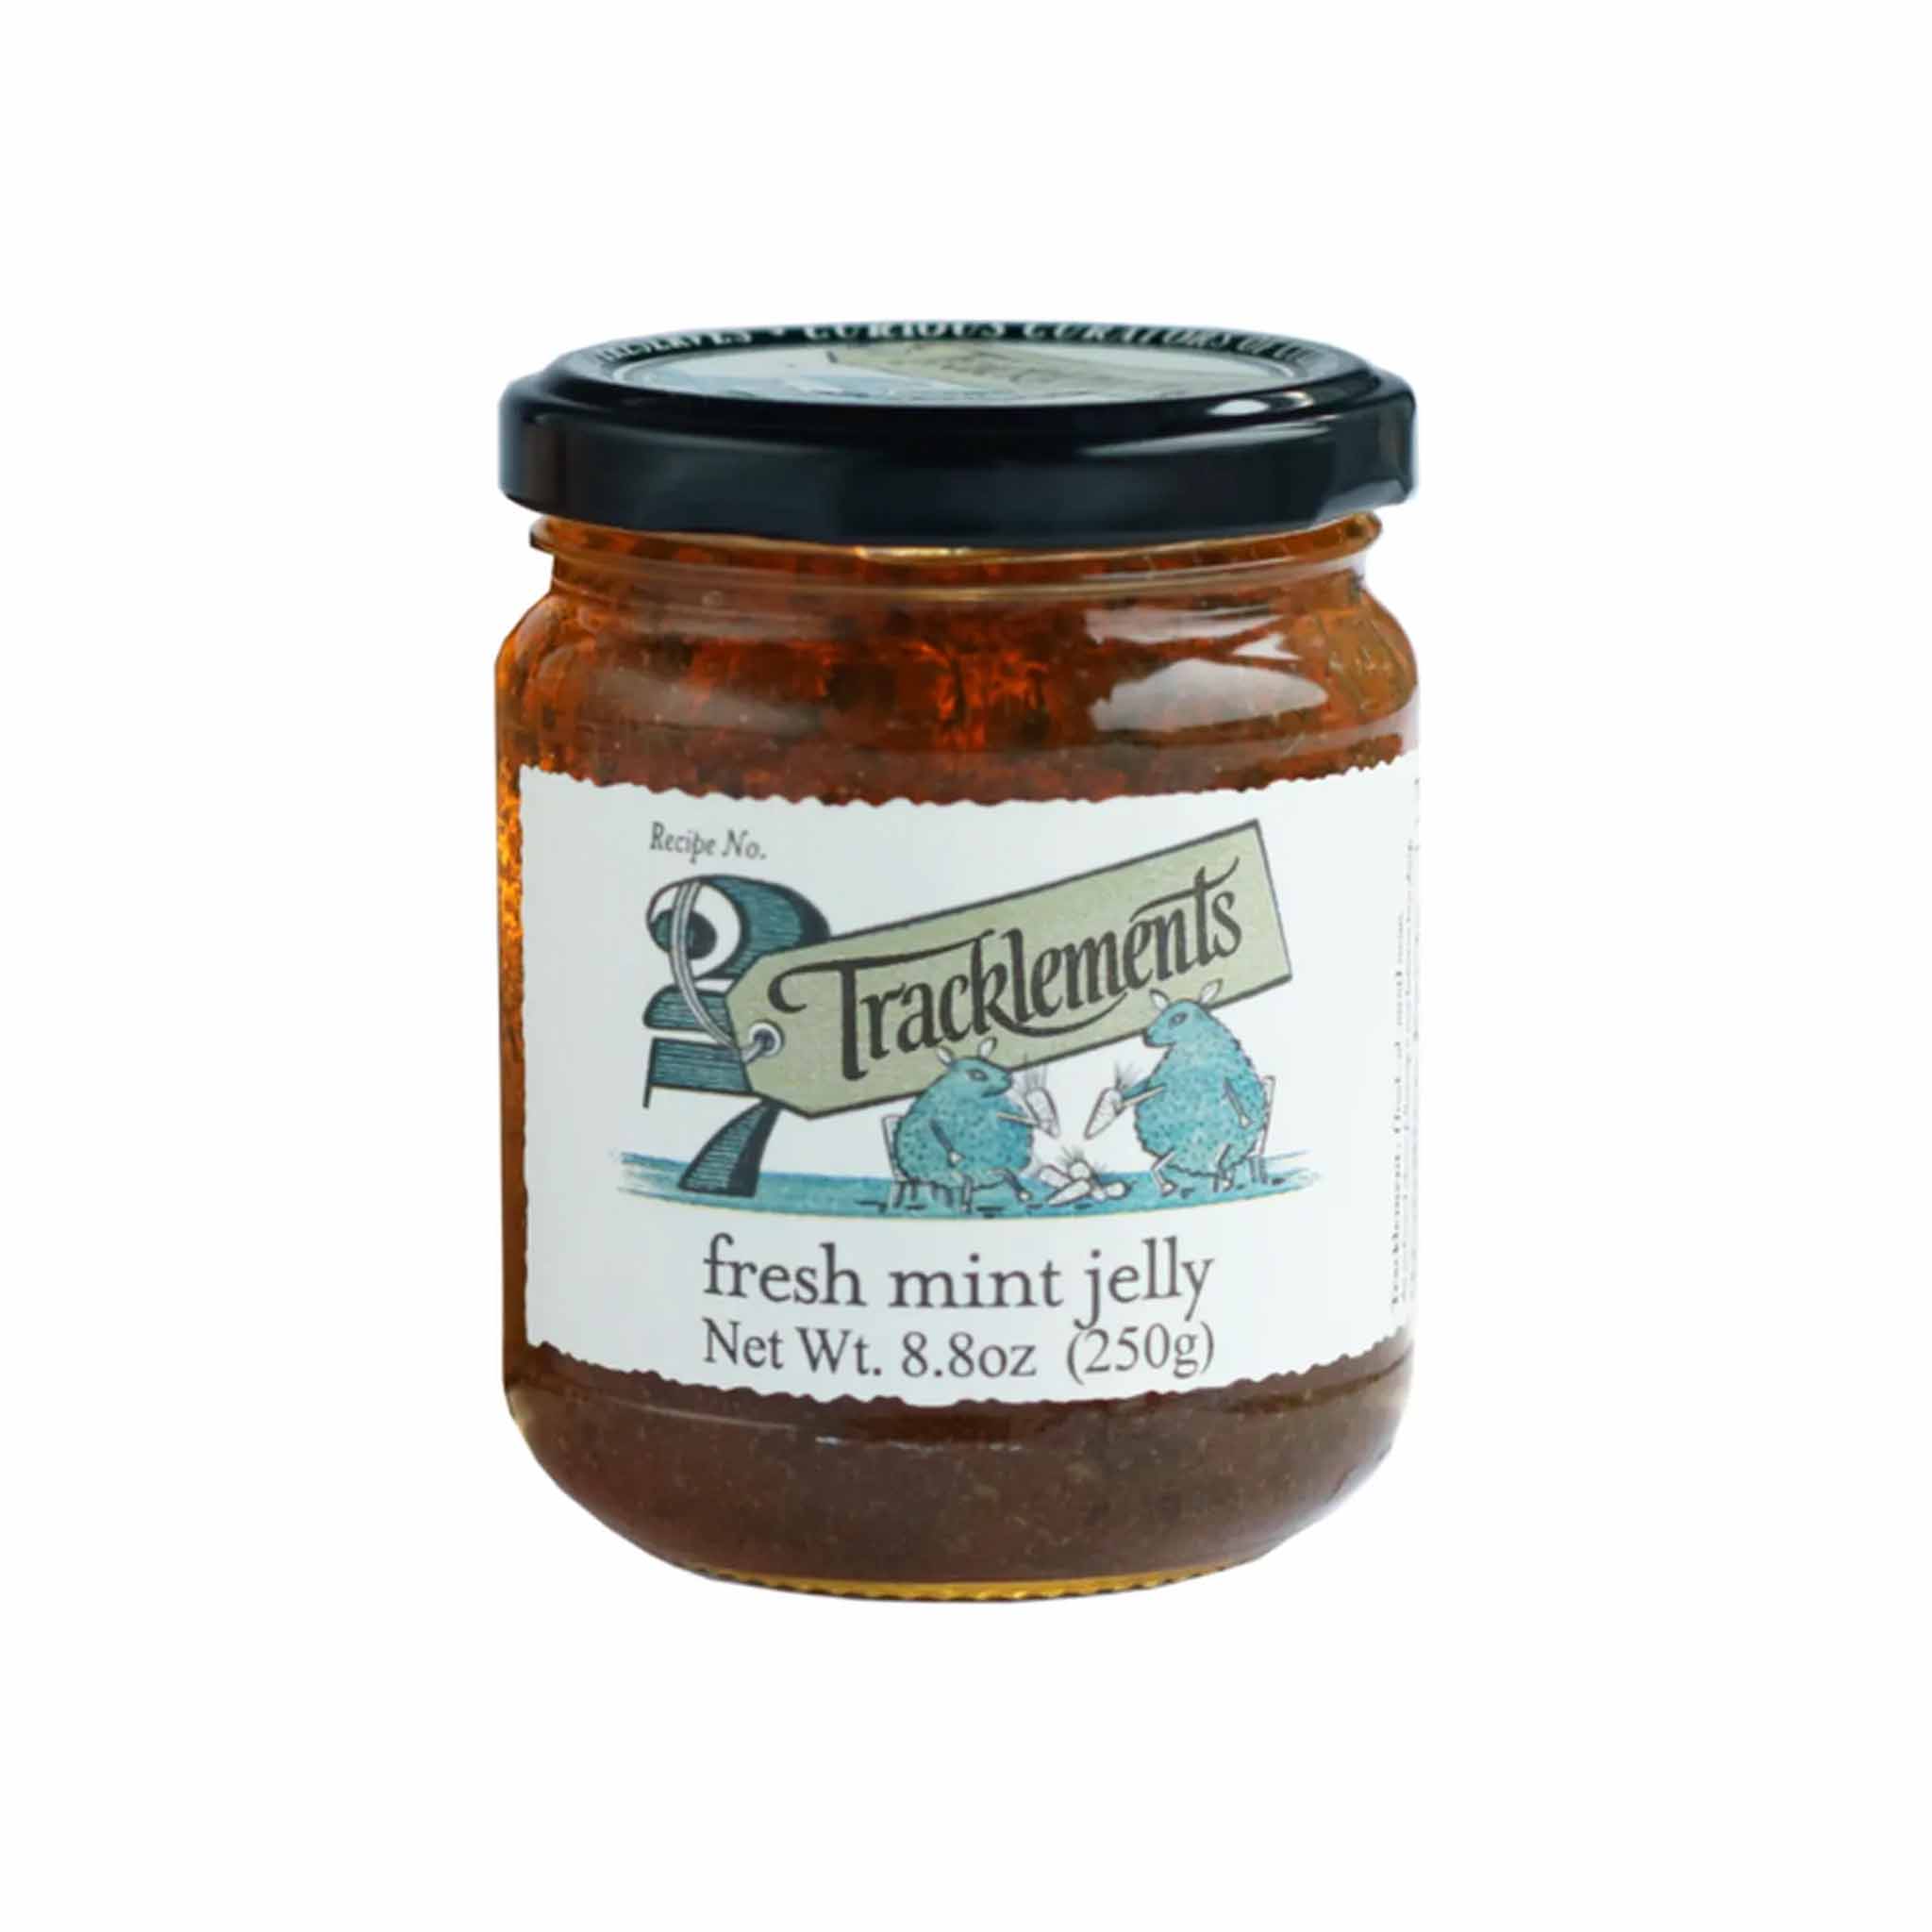 TRACKLEMENTS FRESH MINT JELLY 8.8oz